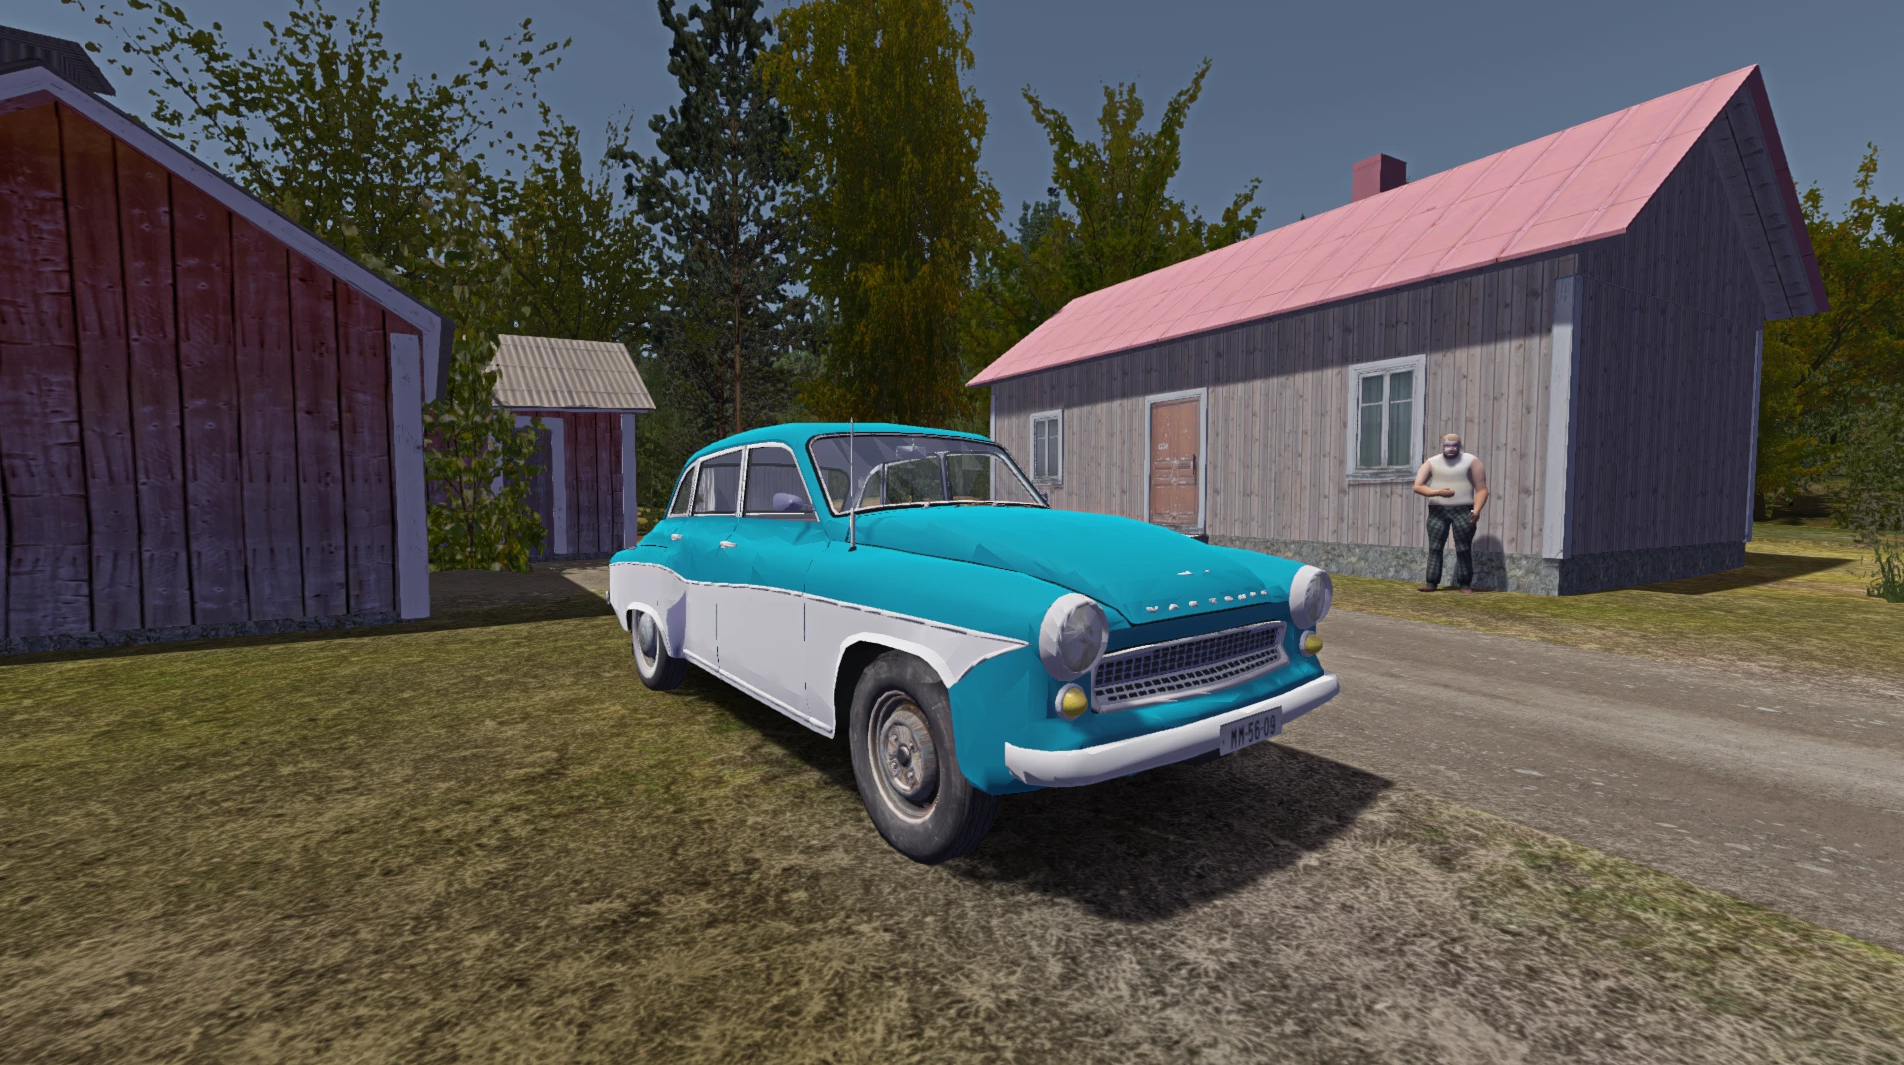 My Summer Car – Wartburg 311 – a new standalone vehicle in the game